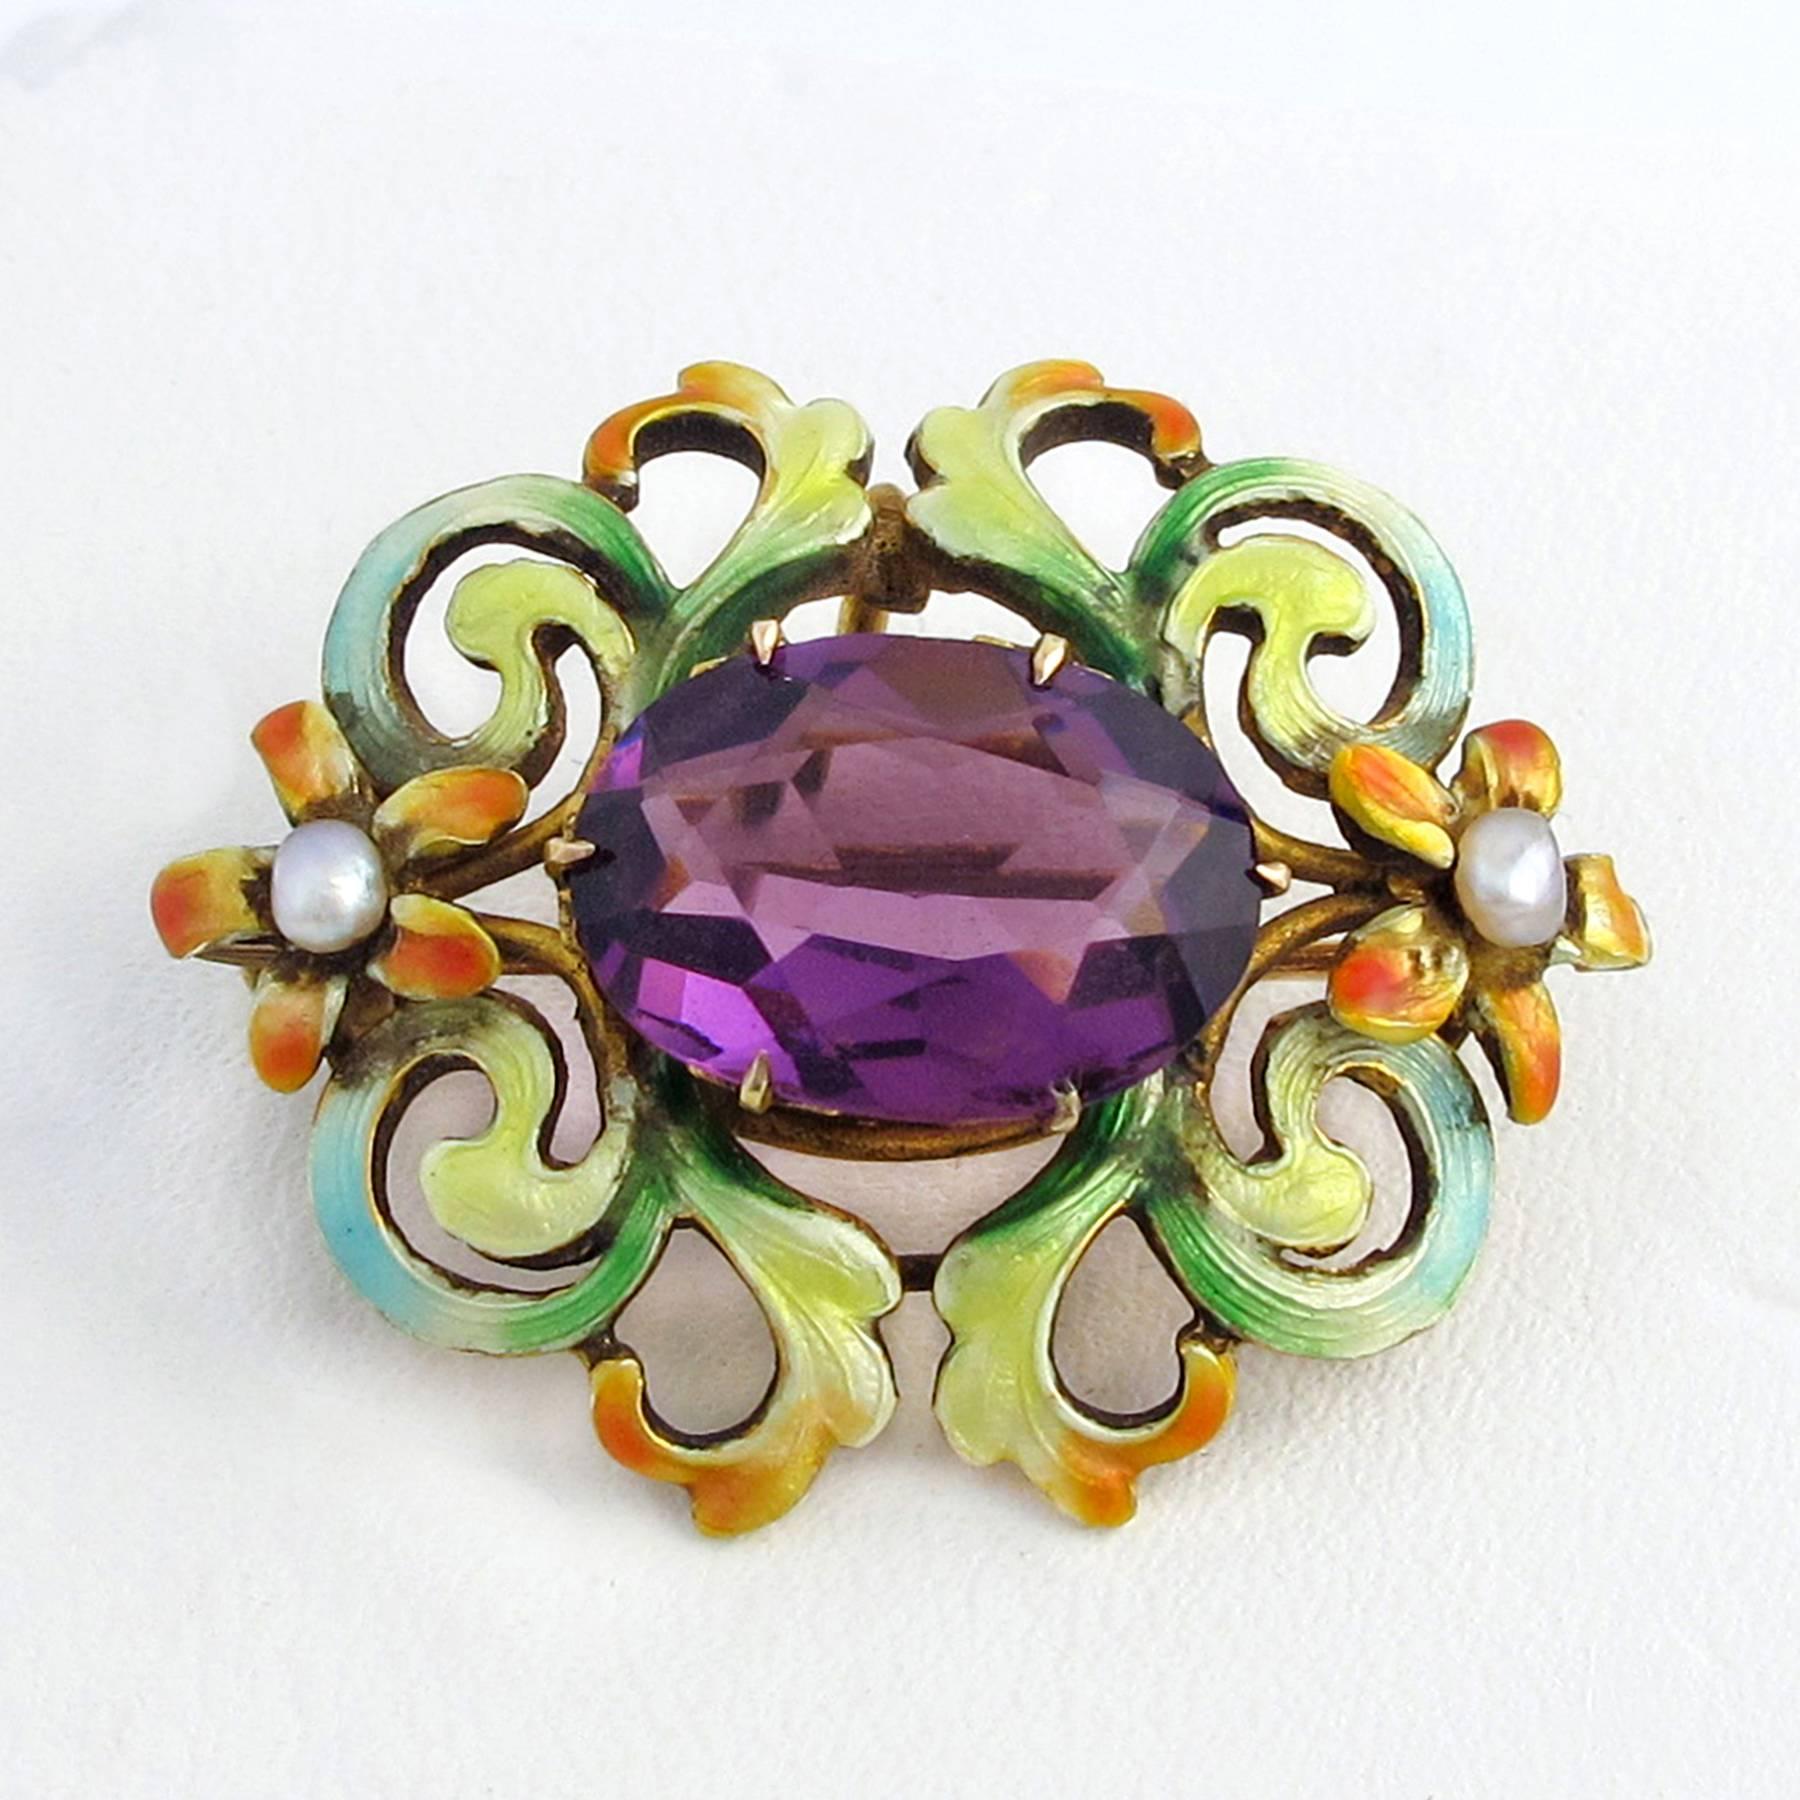 A 19th century Art Nouveau pin is center set with a 13.00 x 9.30mm oval cut and faceted deep purple Amethyst in an elaborate mount. The  Verre Emaille in predominant shades of green, blue, yellow and orange is beautifully rendered and detailed with